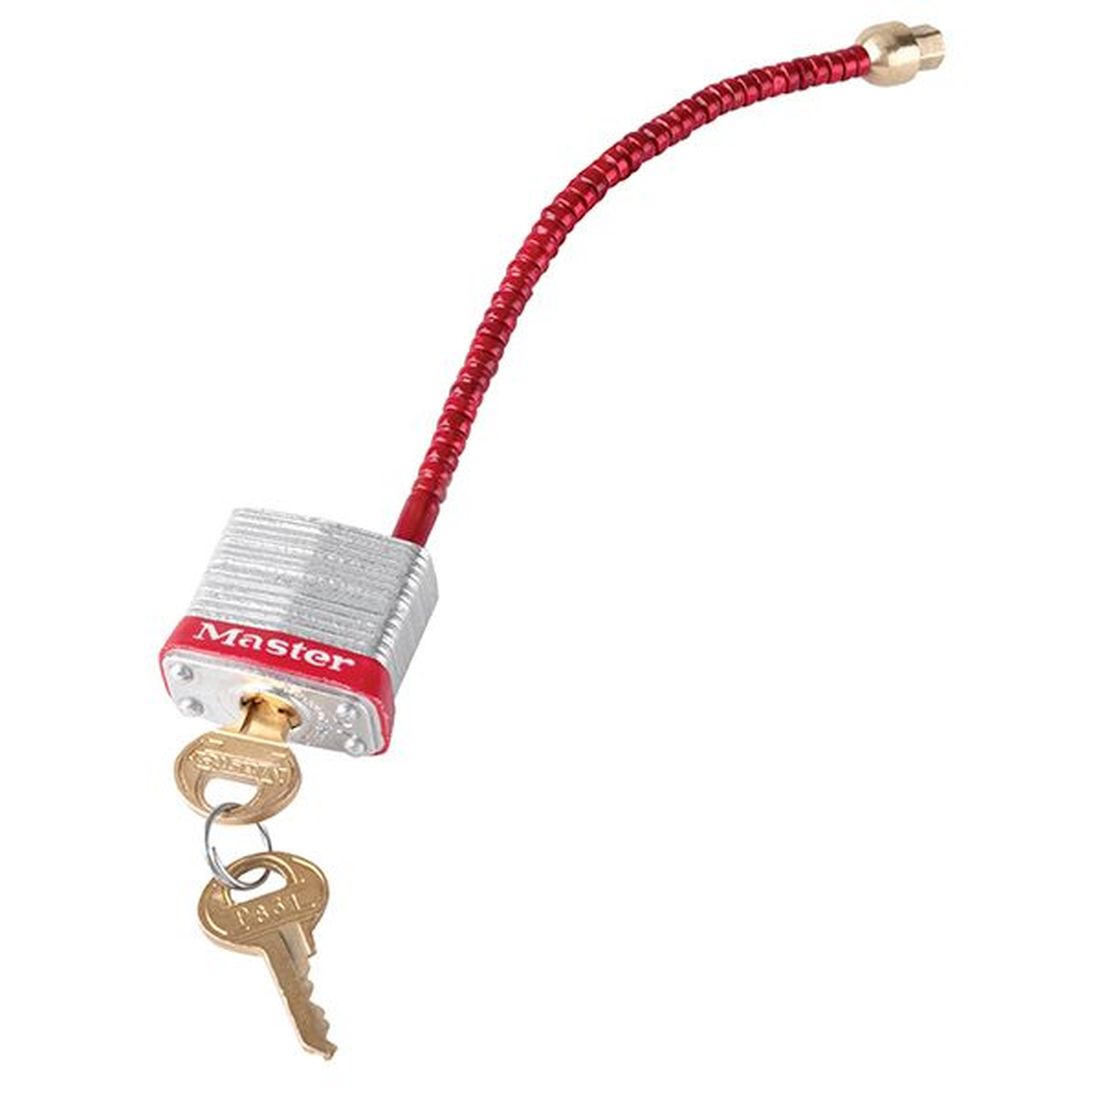 Master Lock Lockout Padlock with Flexible Braided Steel Cable Shackle                       